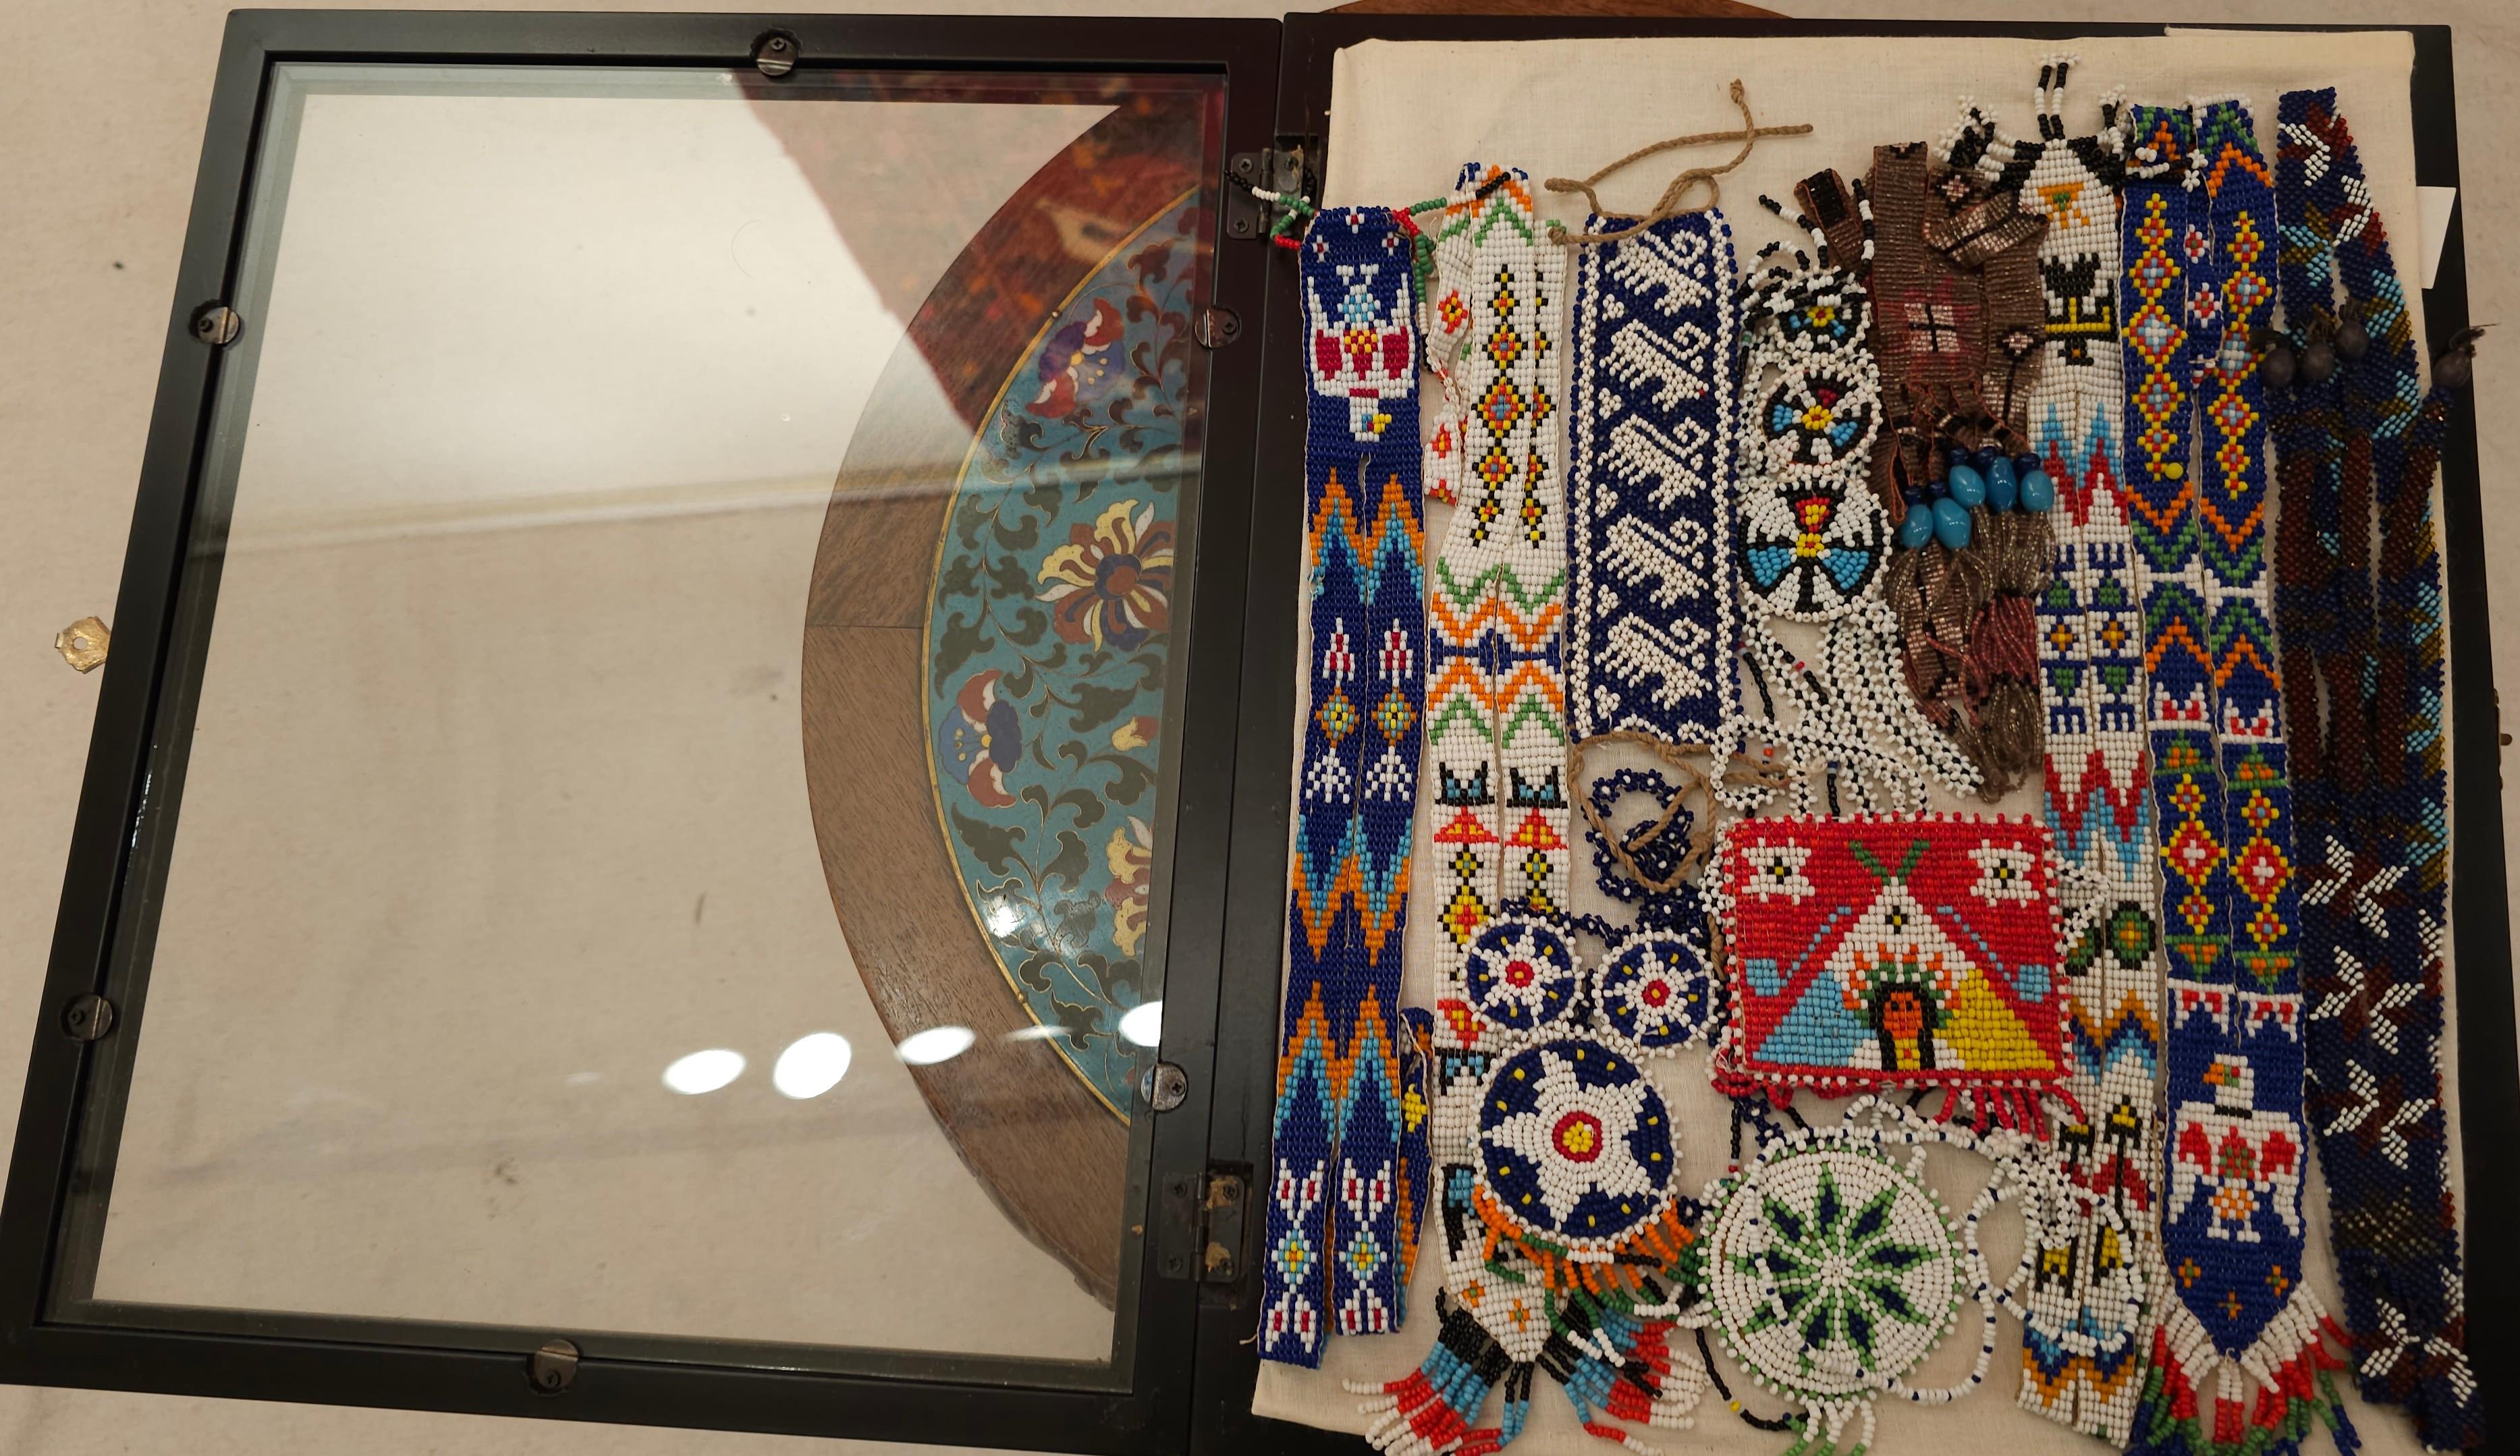   Native American Navajo Beadwork Necklace Collection Displayed in a Shadow Box 2